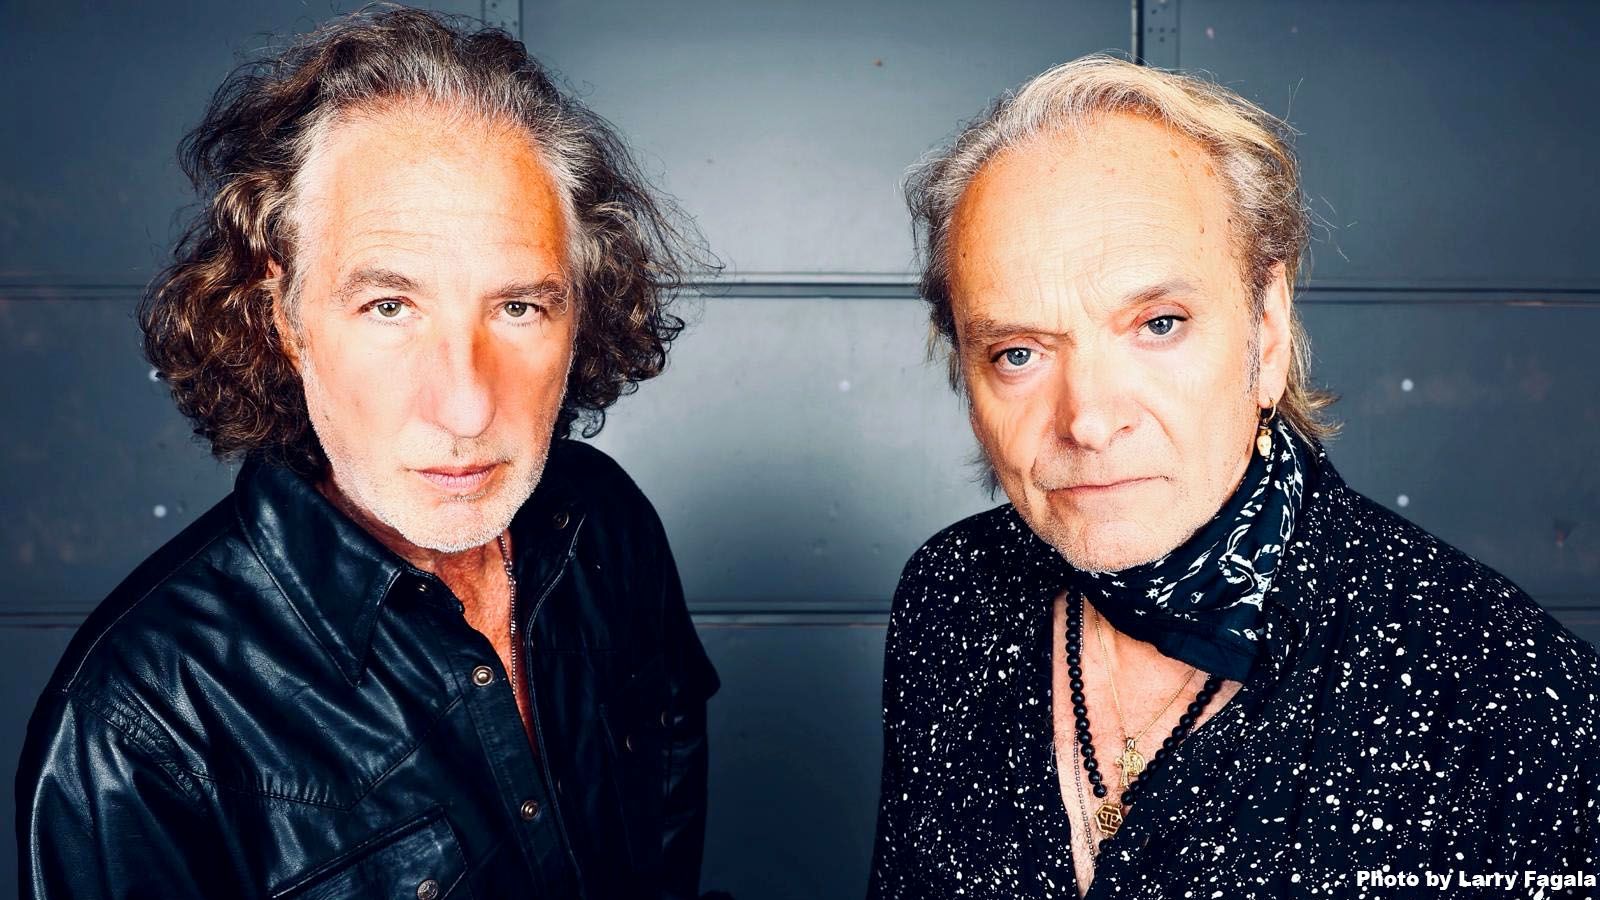 Nick Feldman, left, and Jack Hues of Wang Chung will bring their Abducted by the 80’s tour to The Clyde Theatre on Sunday, June 9, with Naked Eyes and Men Without Hats.